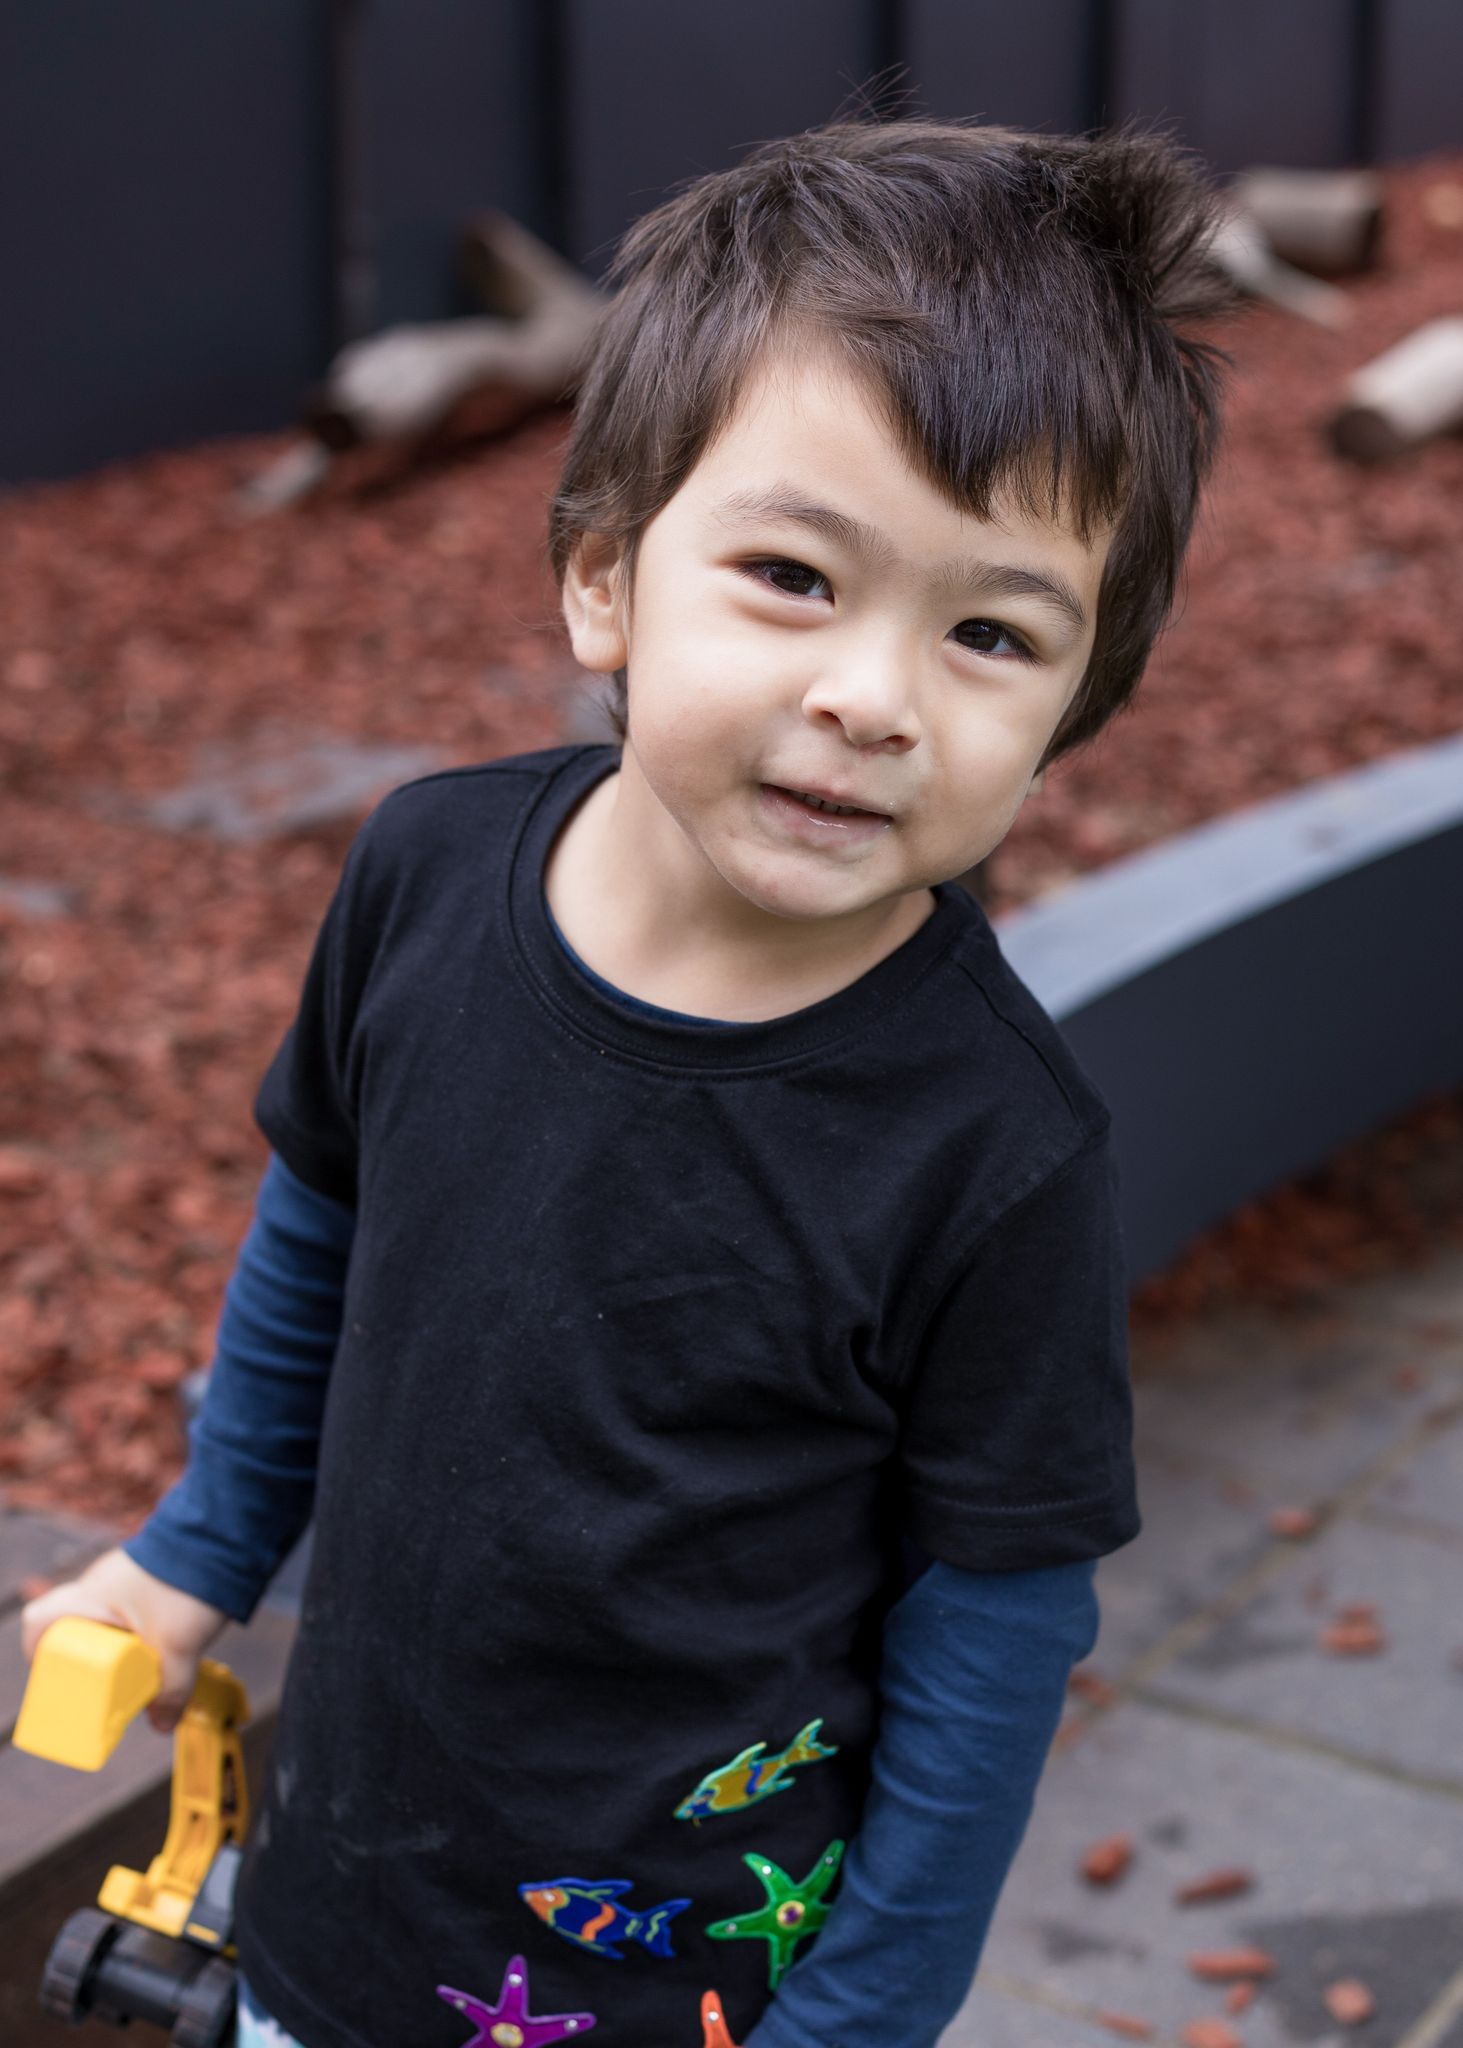 2-year-old Kai was born with Hirschsprung's disease.  His Japanese mother Mari Suzuki hopes she can spread an understanding of the disease widely.